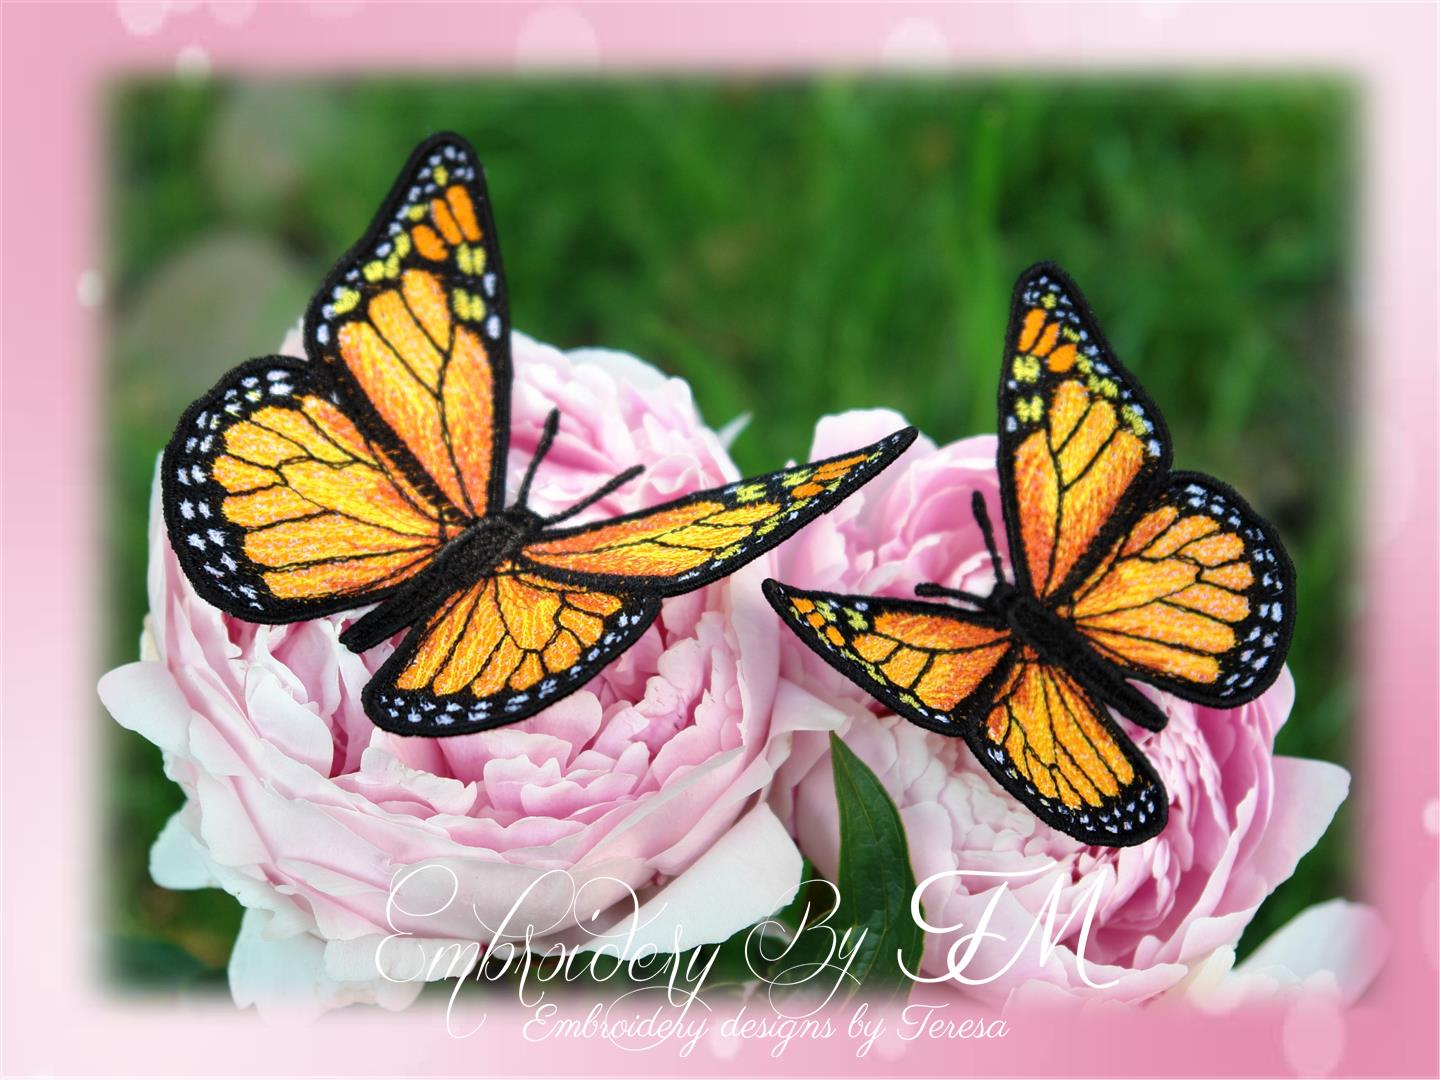 FSL Butterfly No. 8 / Monarch butterfly / two sizes / 4x4 and 5x7